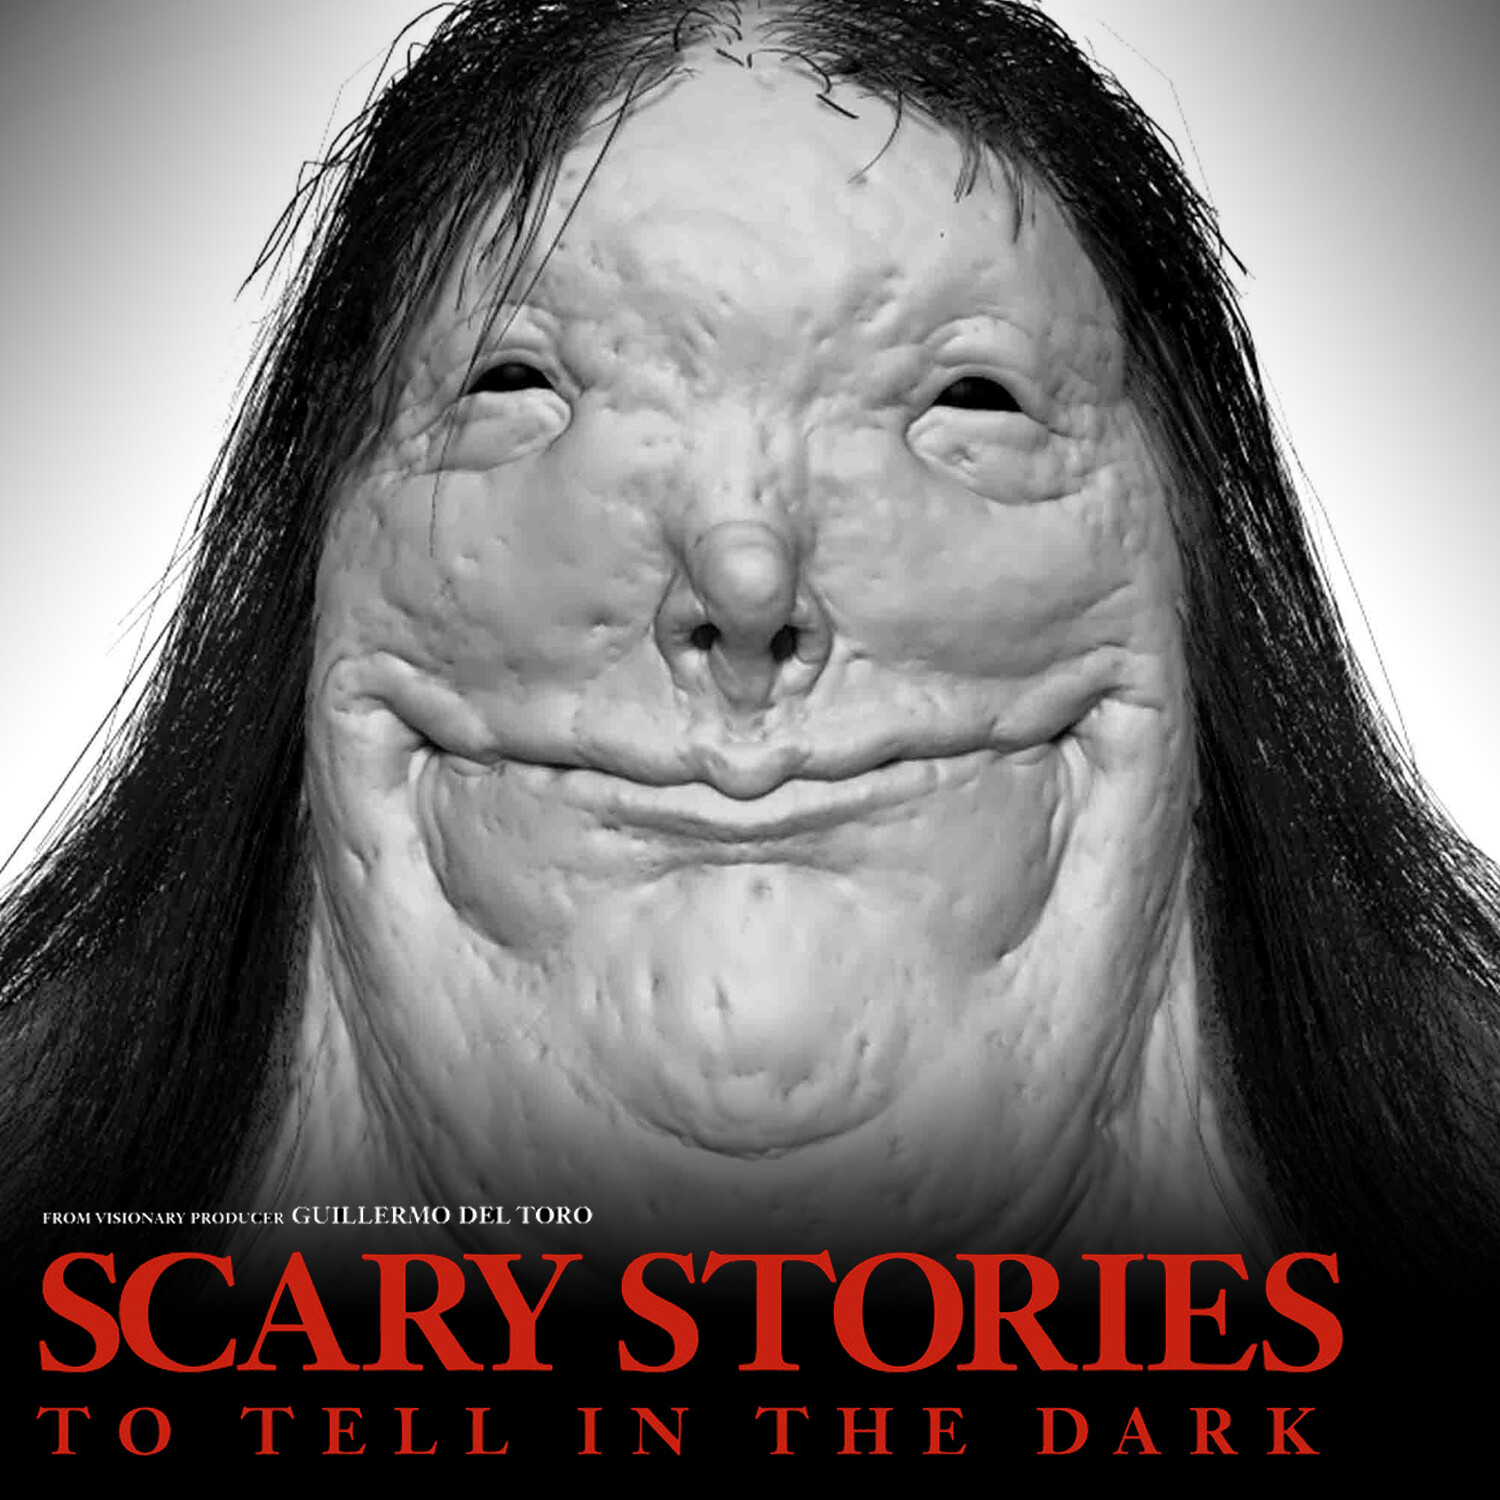 Scary Stories to Tell in The Dark - MauricioRuizDesign - Pale Lady Designs  01.mp4 on Vimeo